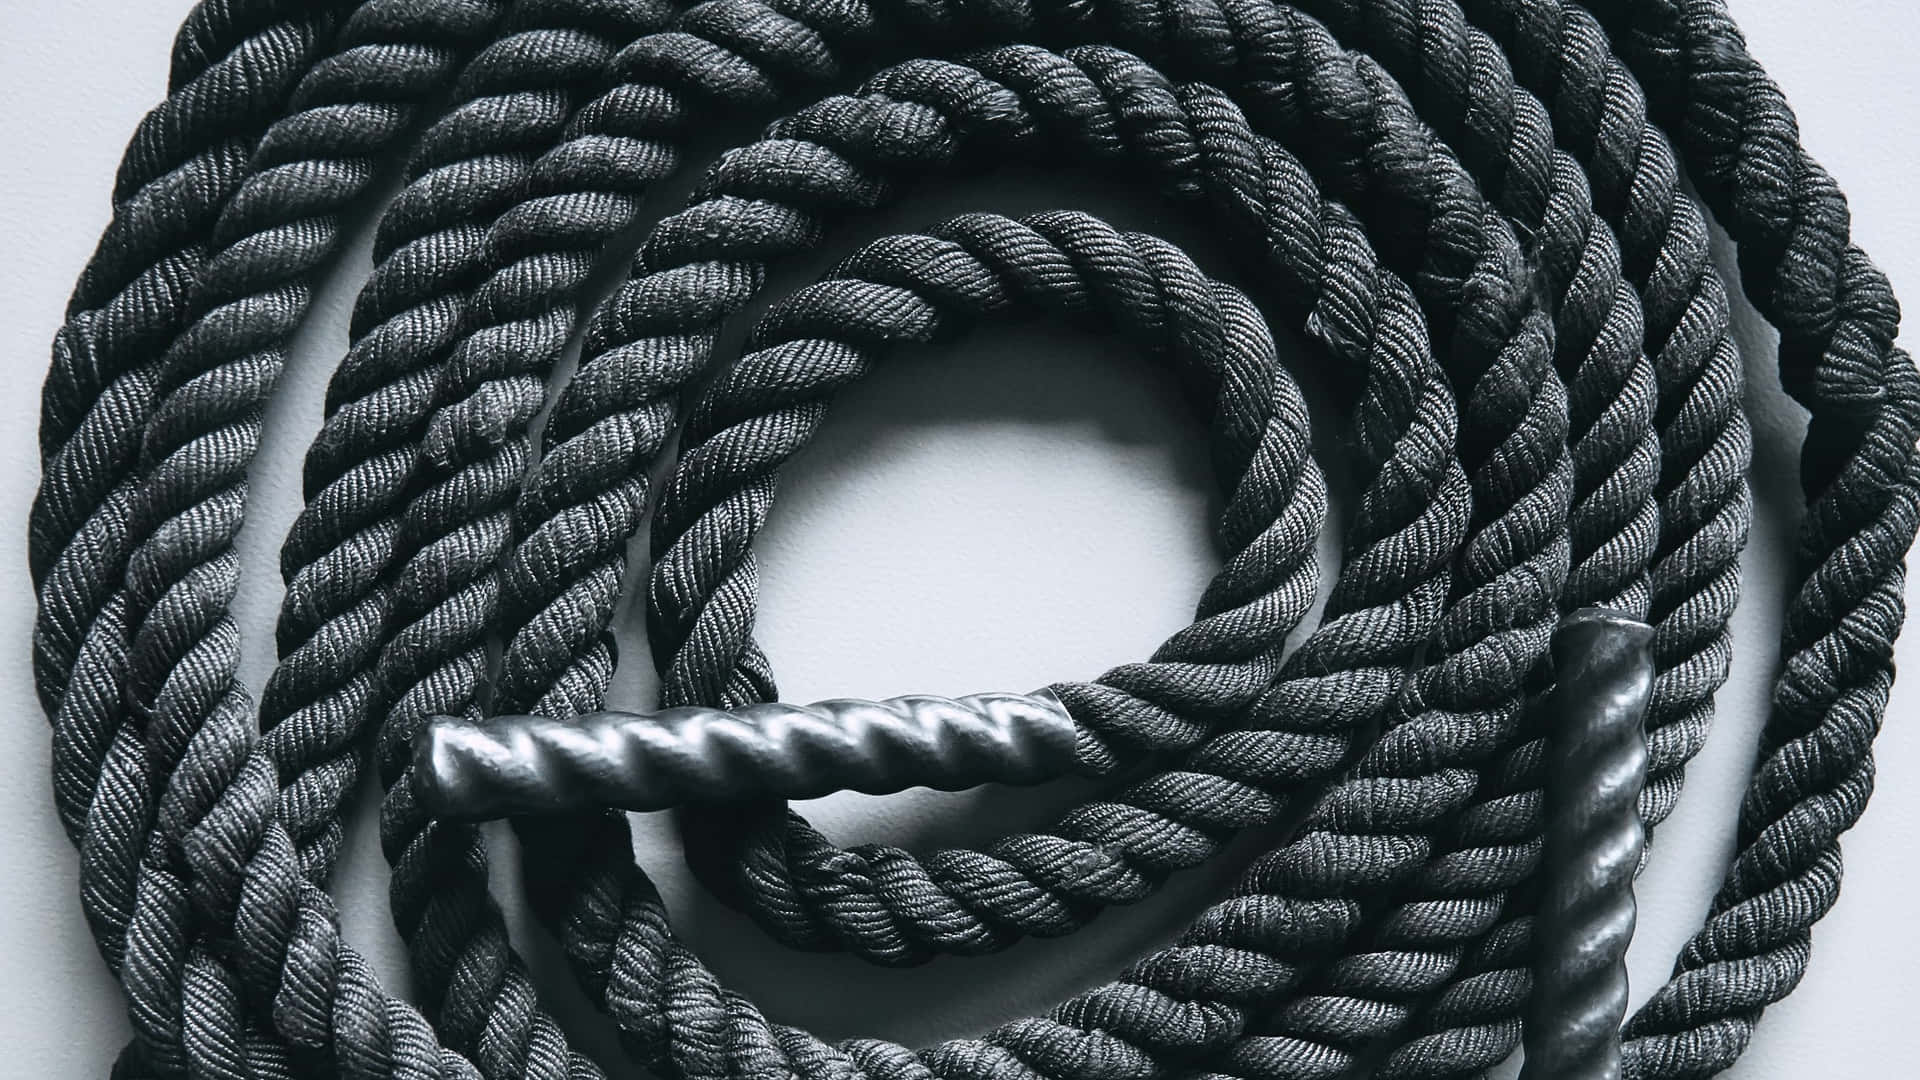 "Sturdy Rope on Wooden Surface"